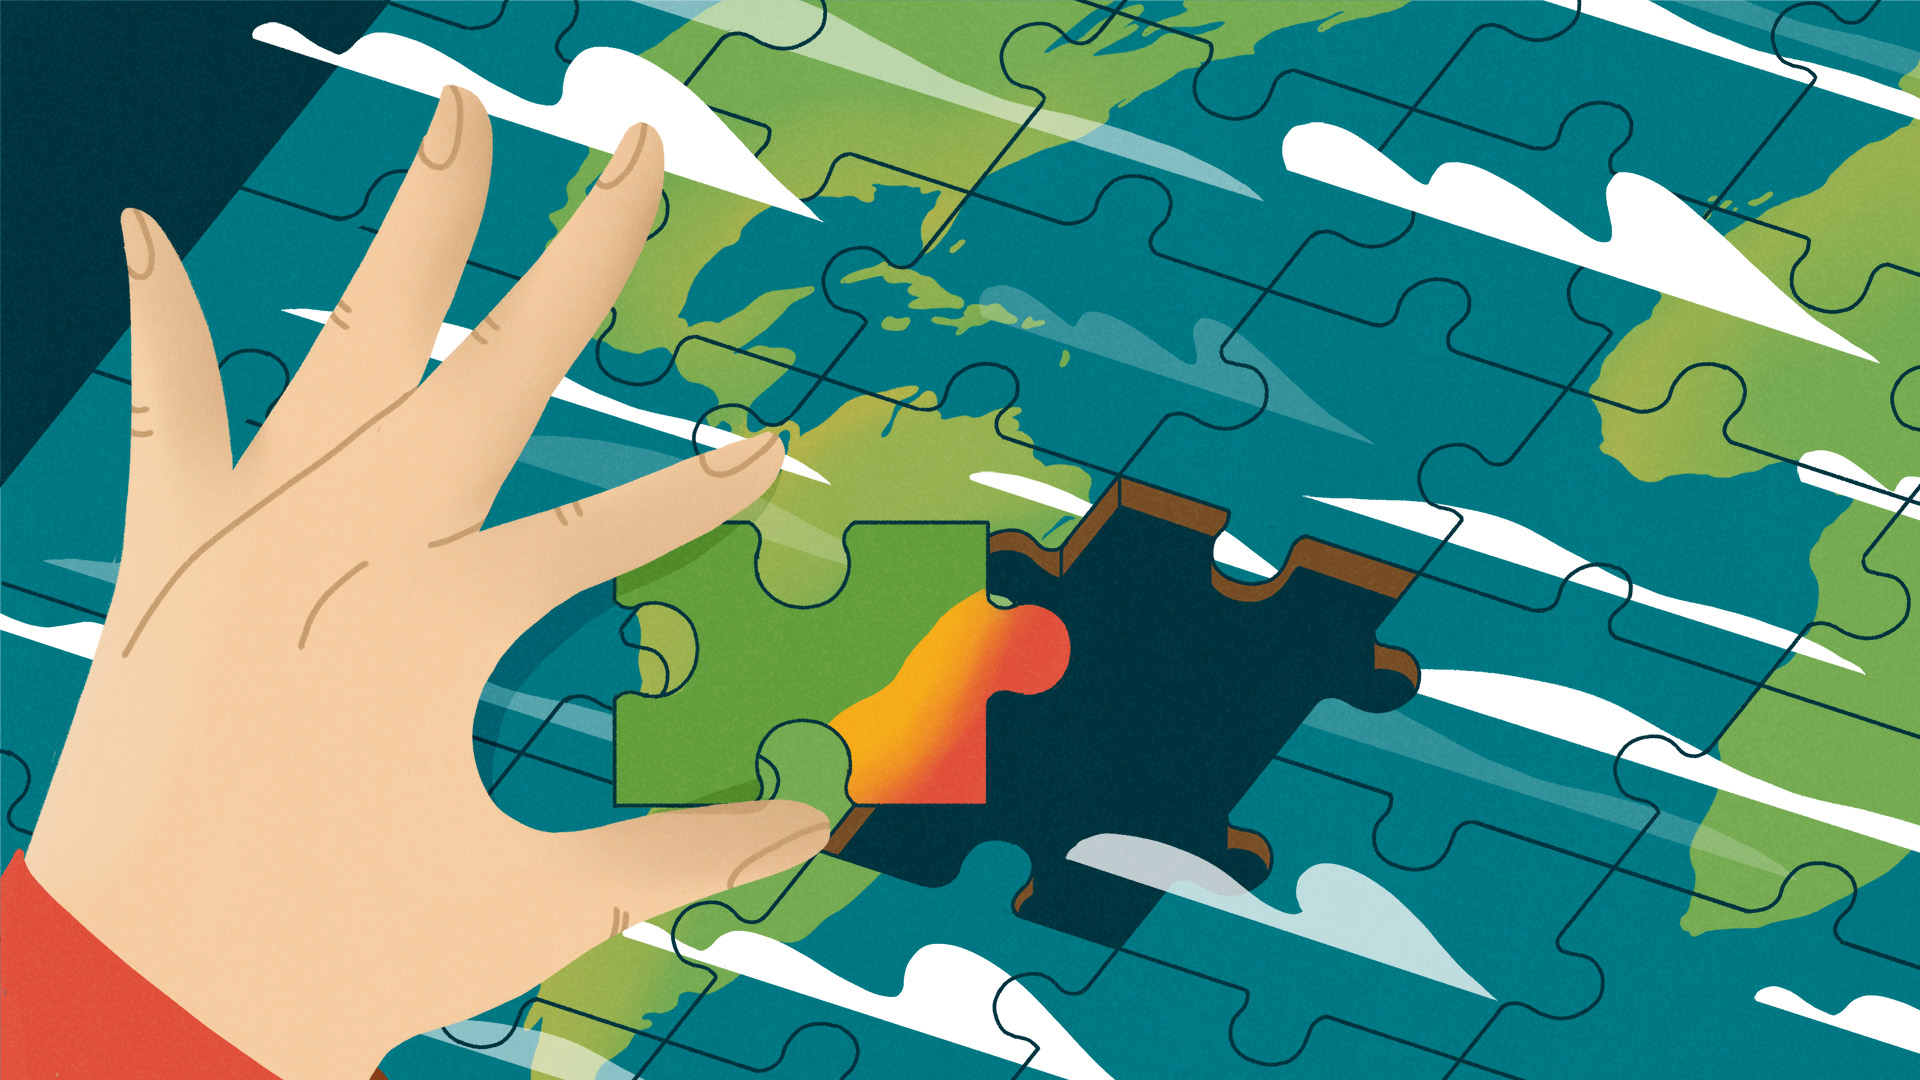 Illustration depicting a hand placing a piece of a puzzle. The puzzle is a map of the Earth